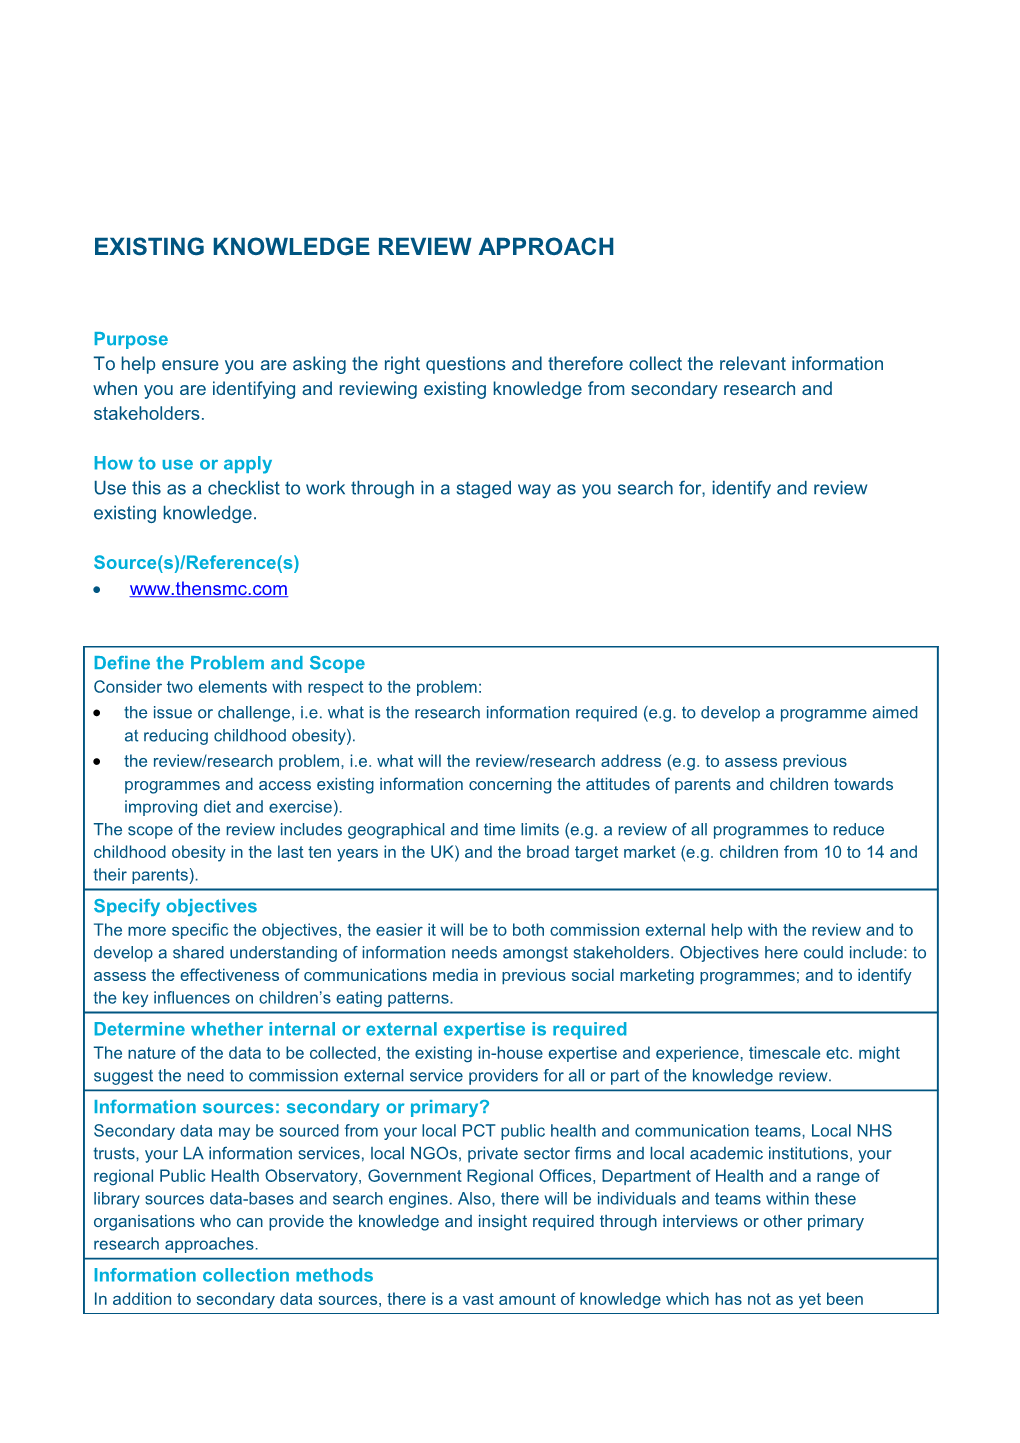 Existing Knowledge Review Approach